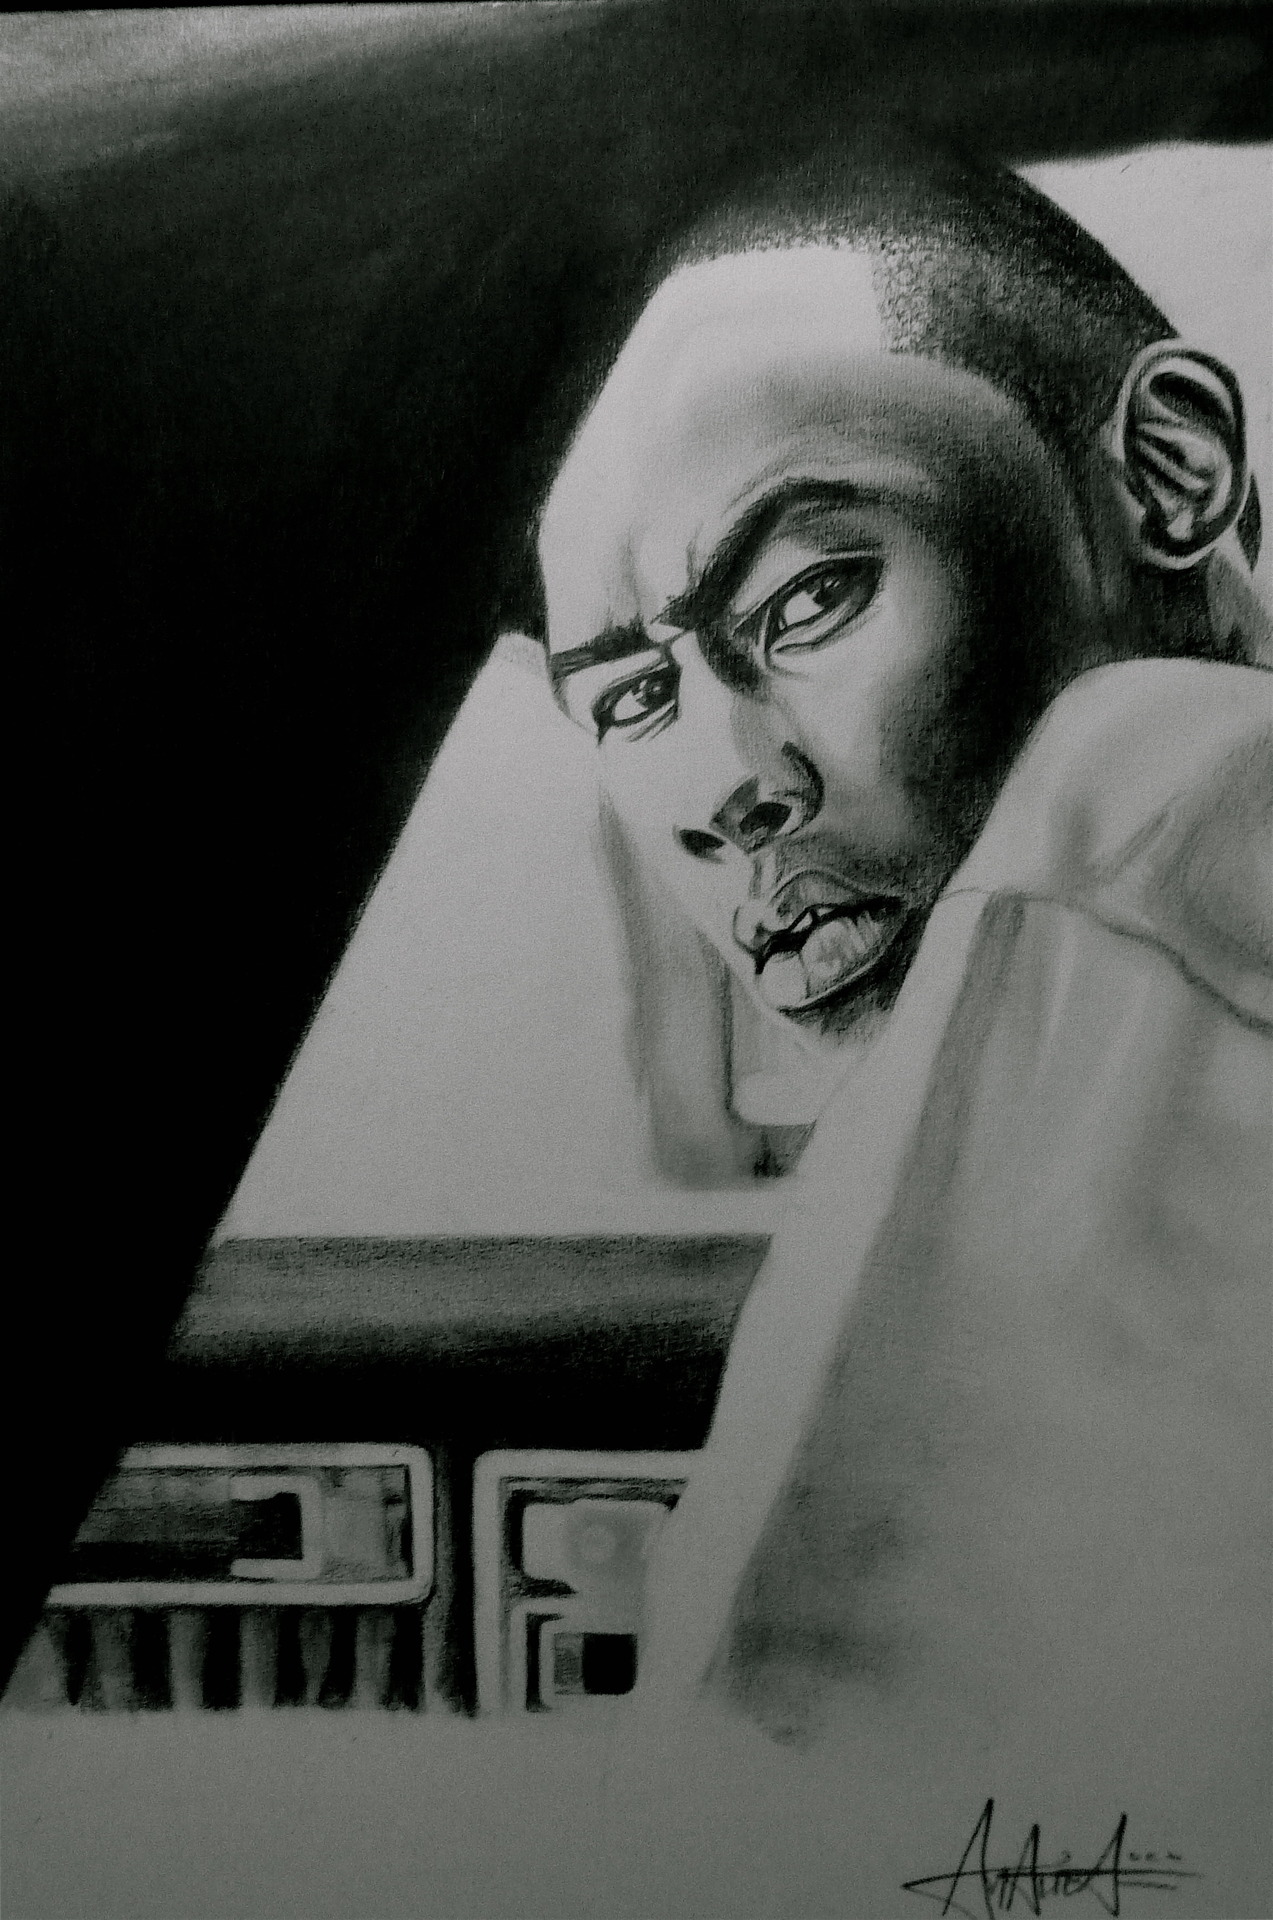 Tyler, the Creator. Size A3. Charcoal. Check out my other drawings, paintings and tattoos at my tumblr: http://thingsbeautious.tumblr.com/